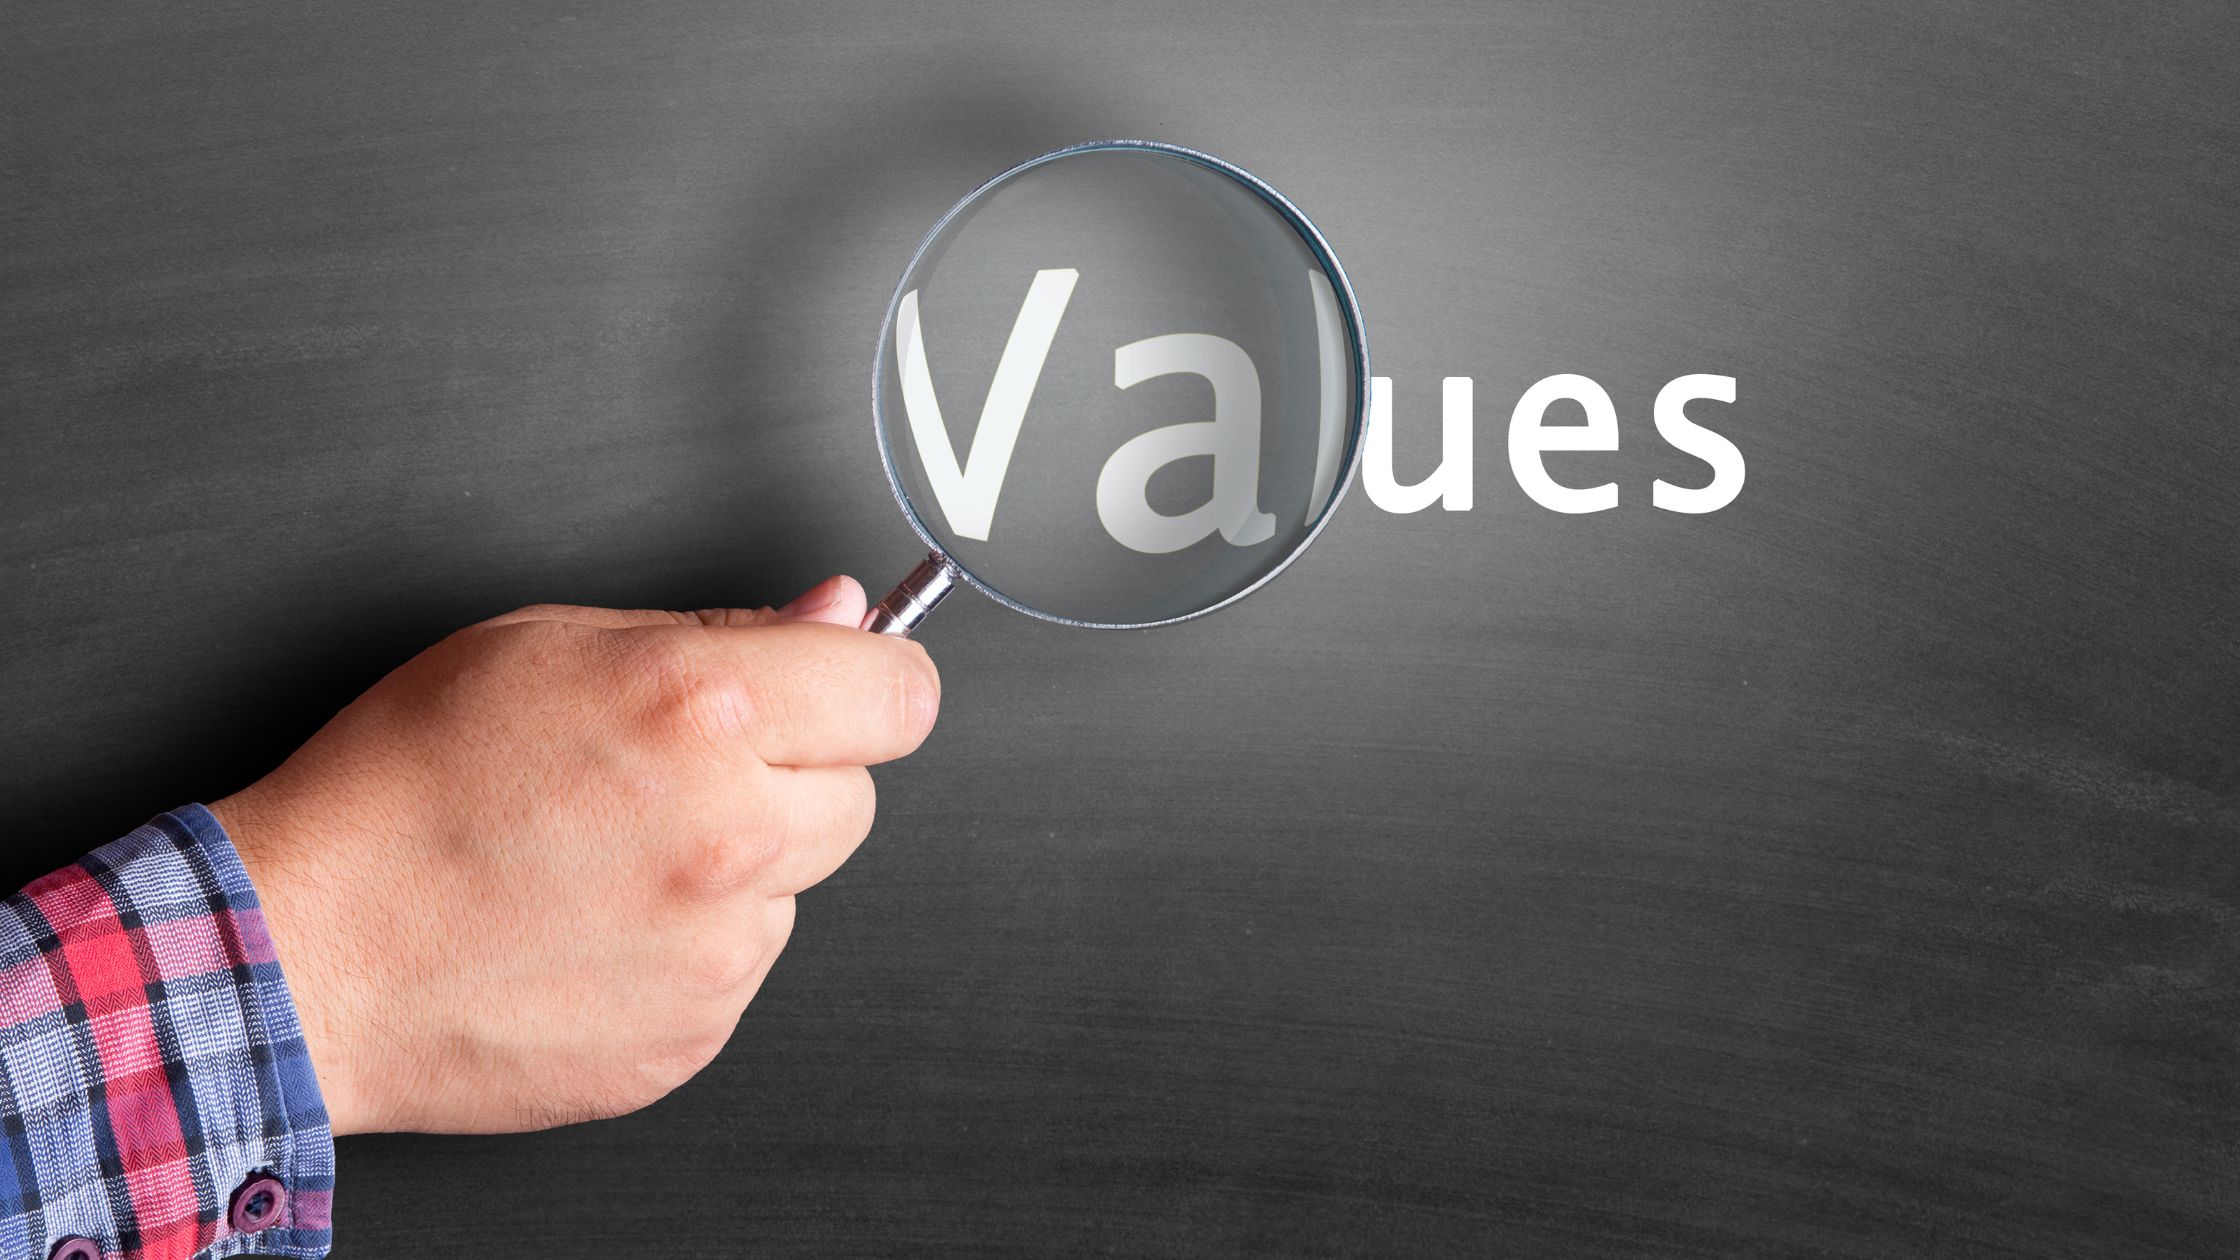 Building confidence by recognizing your values